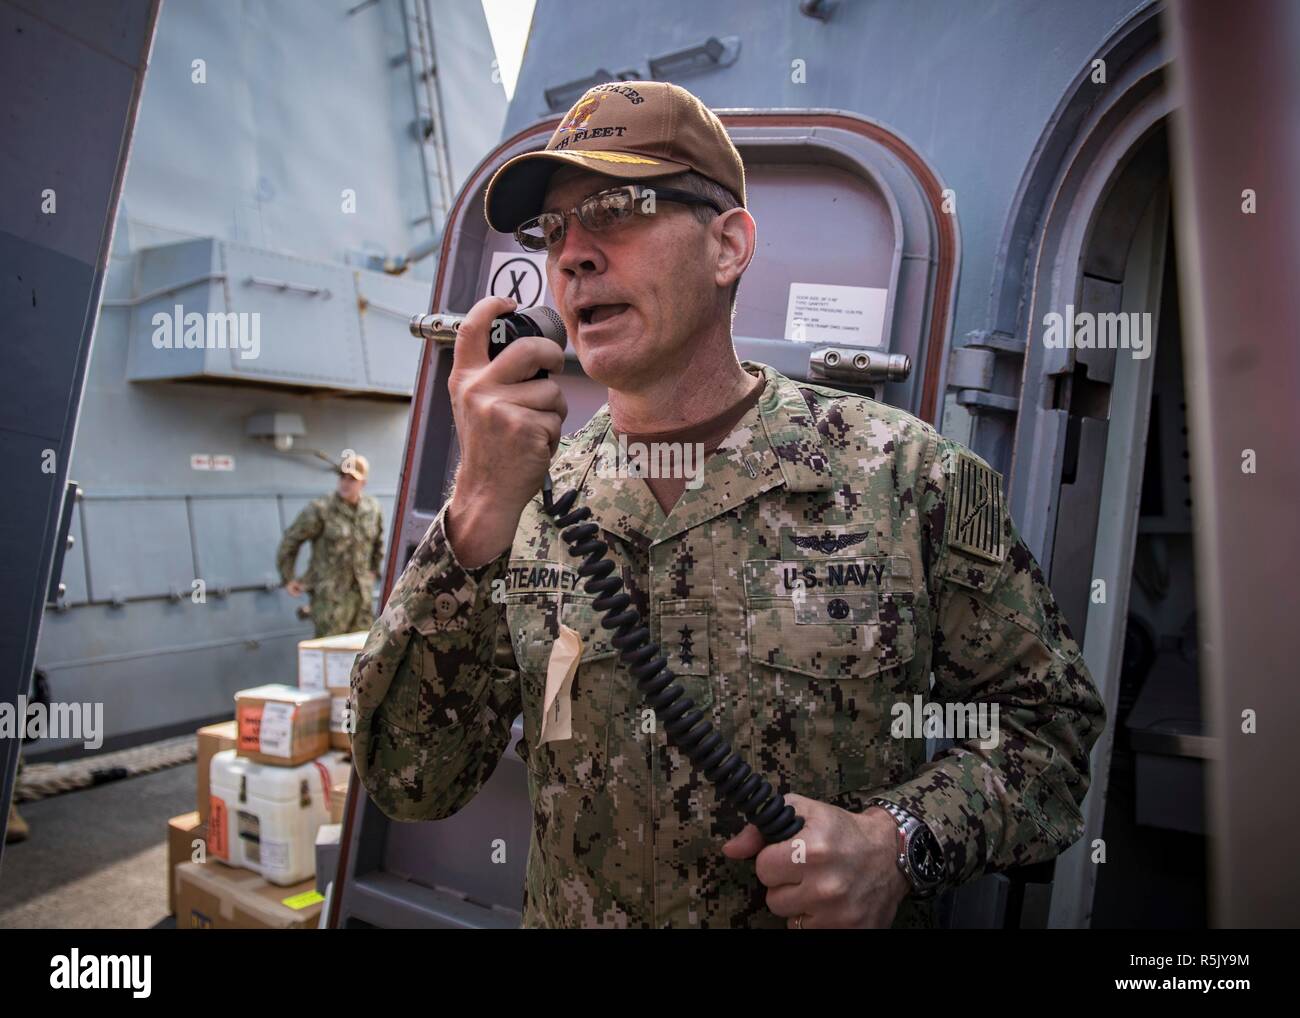 U.S. Navy Vice Adm. Scott Stearney, commander of U.S. Naval Forces Central Command speaks on the 1MC shipboard intercom to welcome the crew of the guided-missile destroyer USS Jason Dunham October 24, 2018 in Manama, Bahrain. Vice Admiral Scott Stearney was found dead in his residence in Bahrain on December 1, 2018 of suicide. Stock Photo